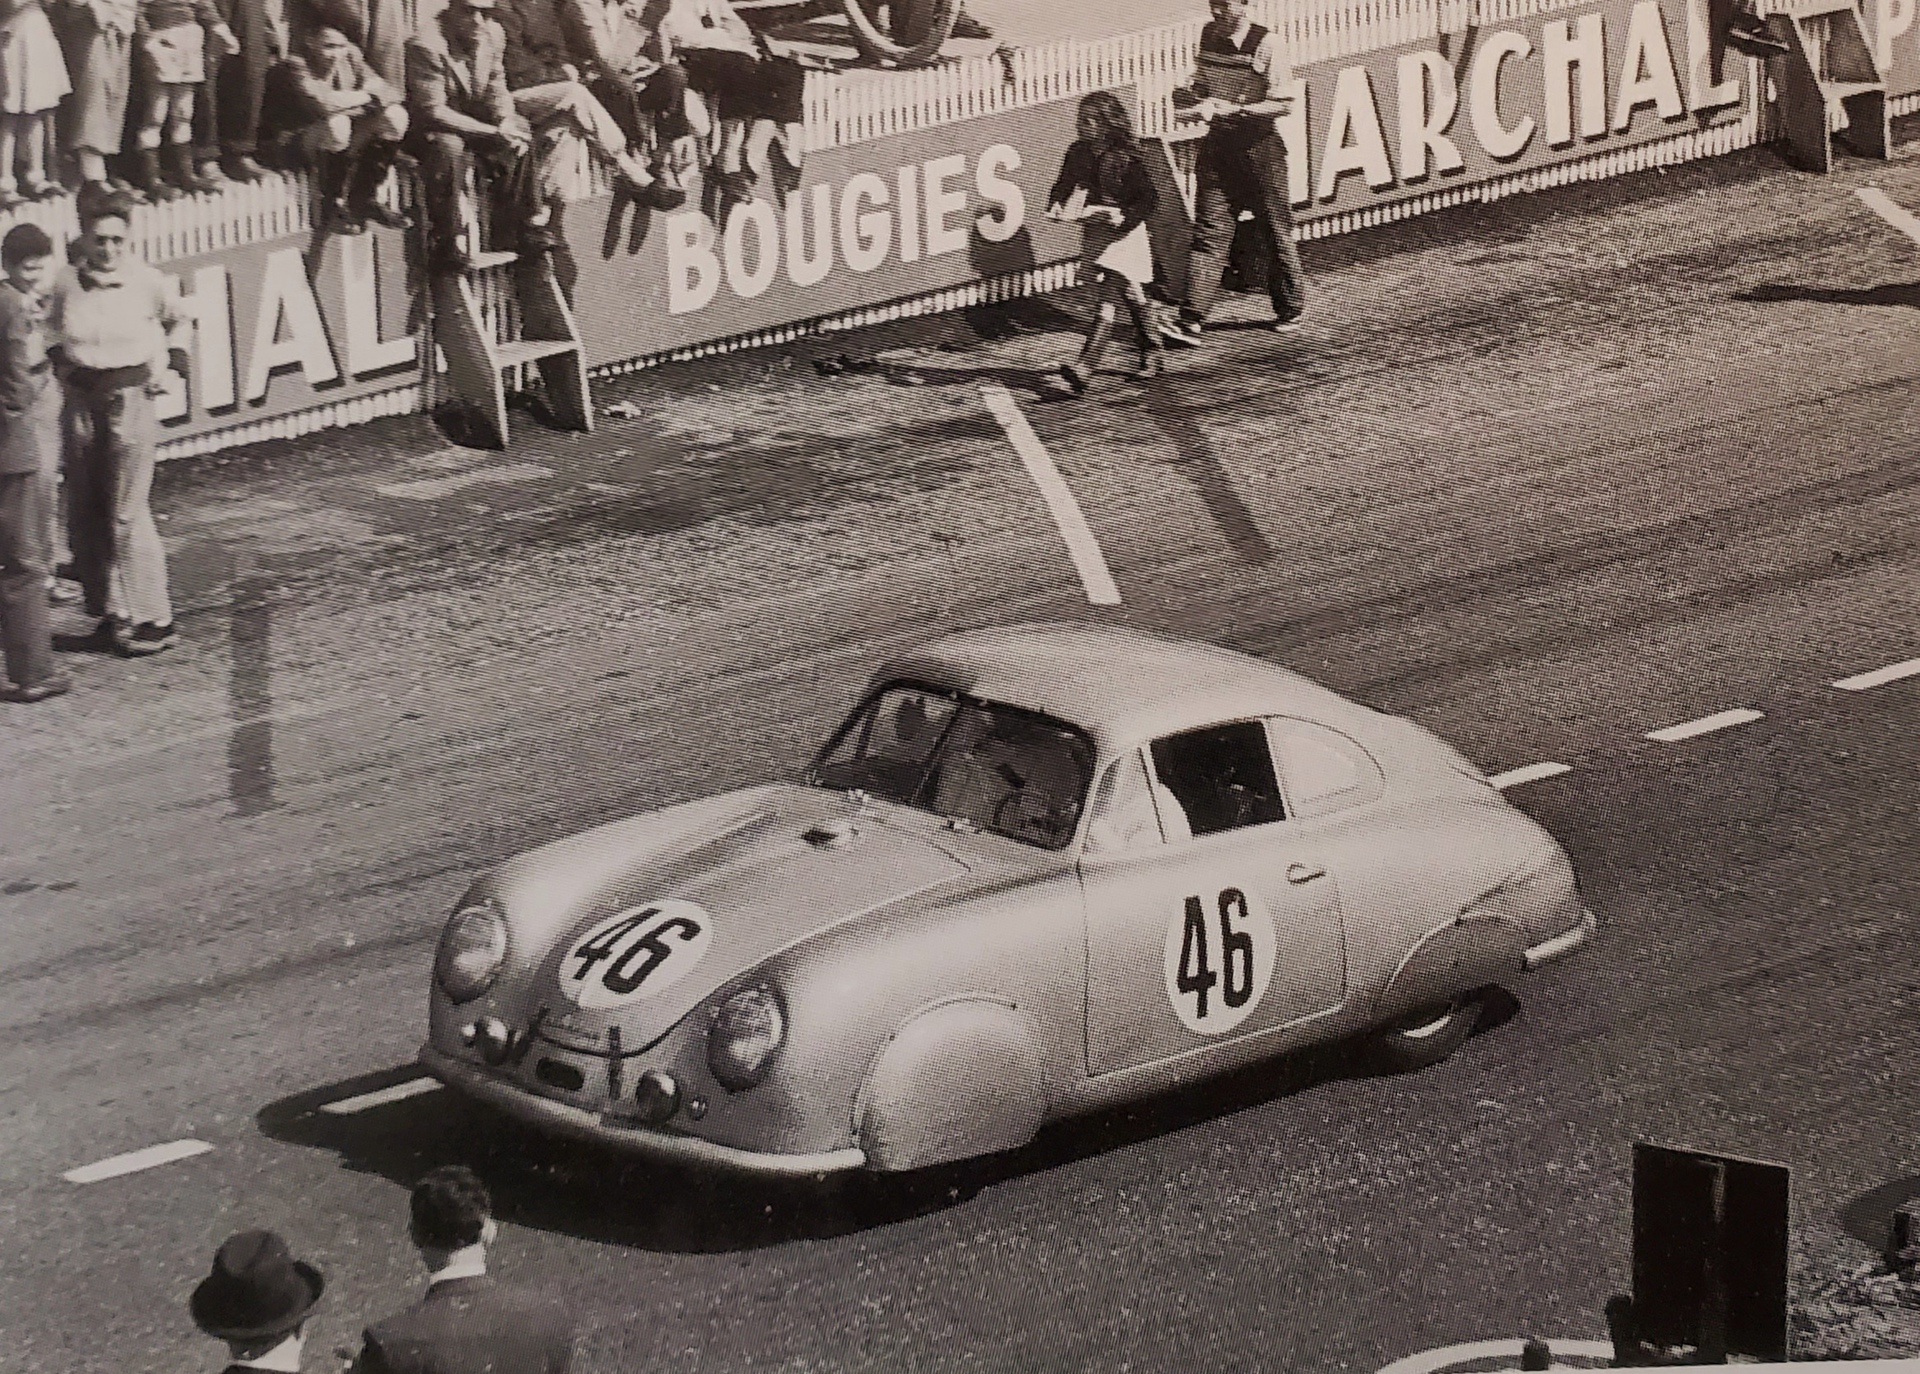 Porsche 356 SL at 24 Hours of Le Mans in 1951